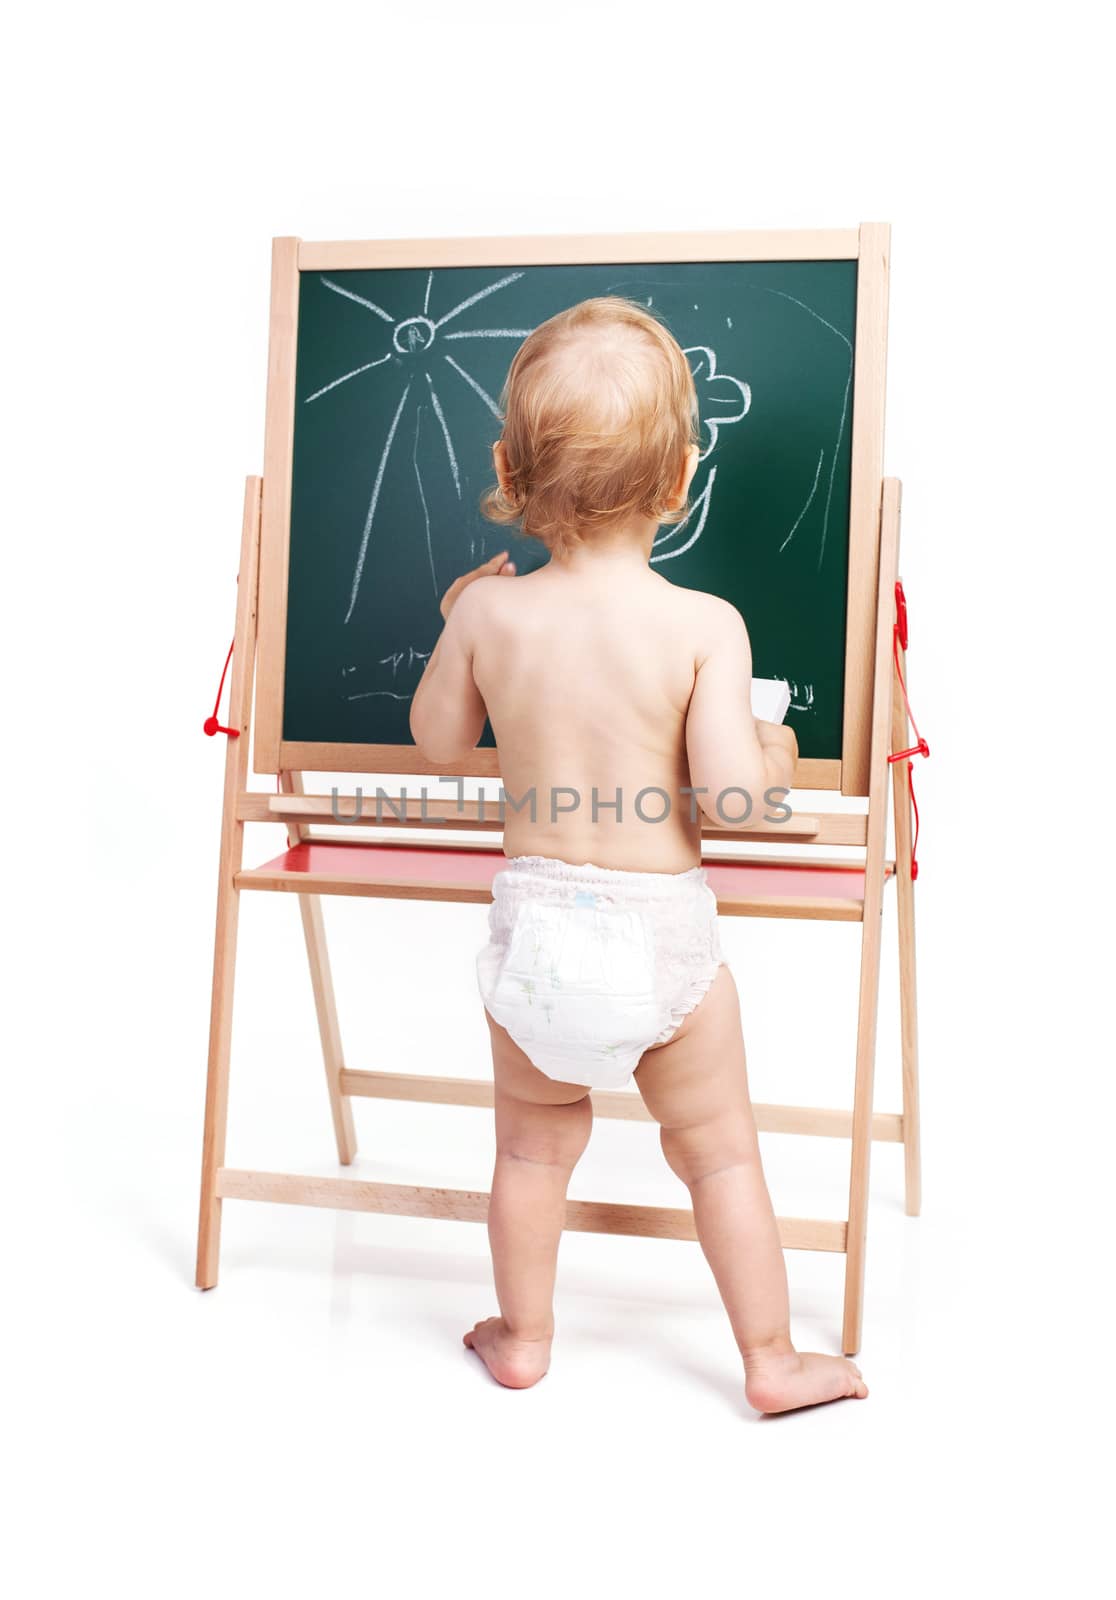 Baby boy drawing on chalkboard over white background